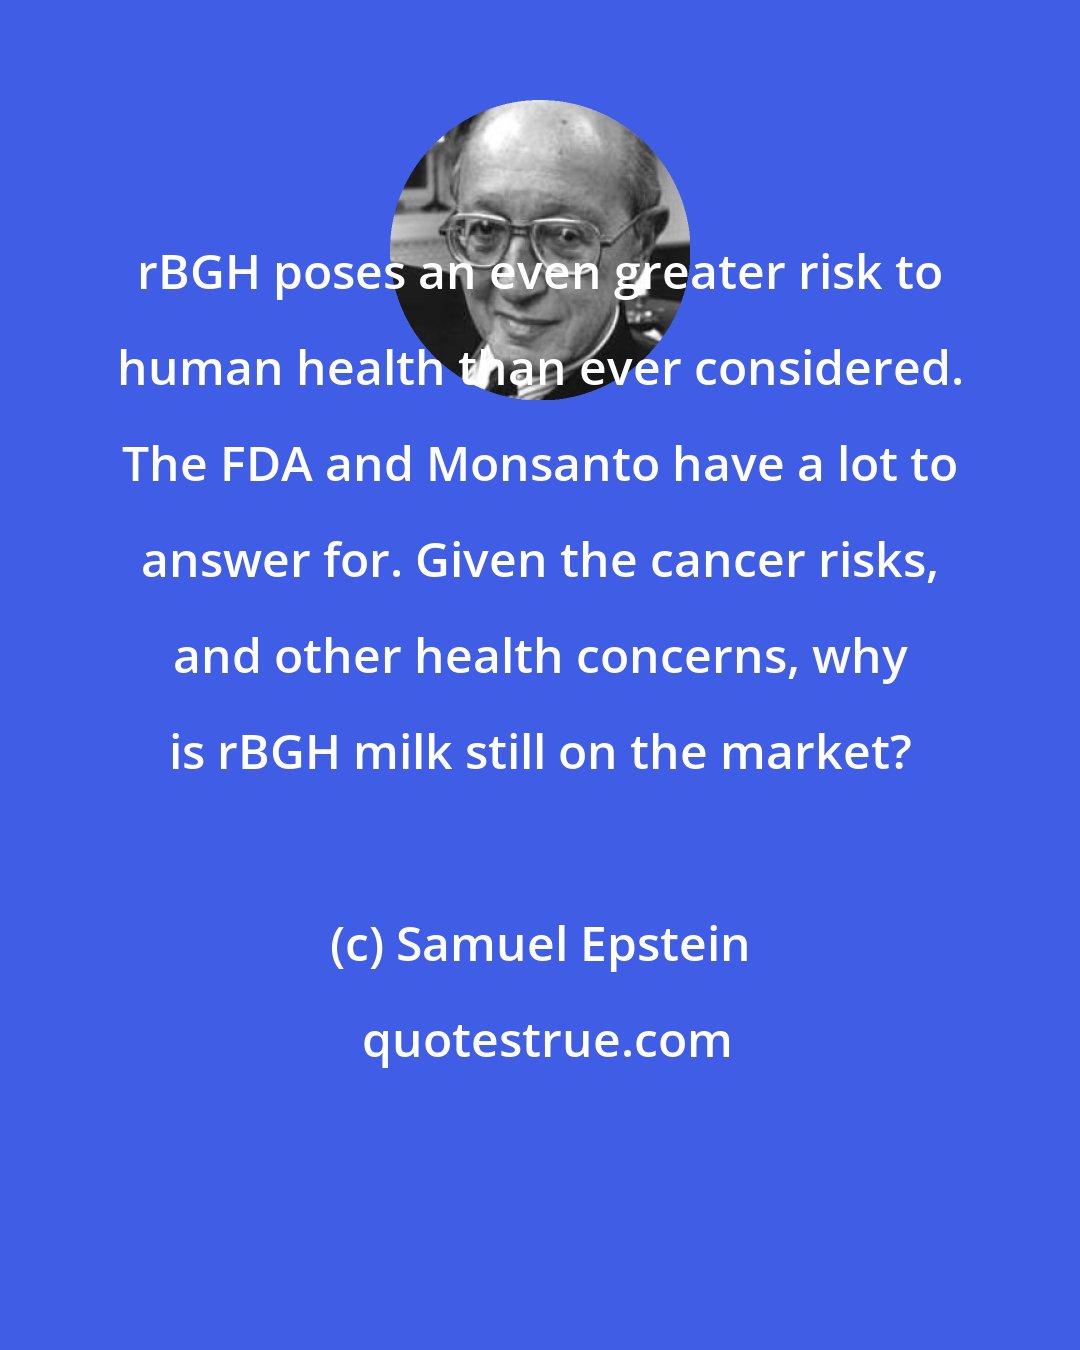 Samuel Epstein: rBGH poses an even greater risk to human health than ever considered. The FDA and Monsanto have a lot to answer for. Given the cancer risks, and other health concerns, why is rBGH milk still on the market?